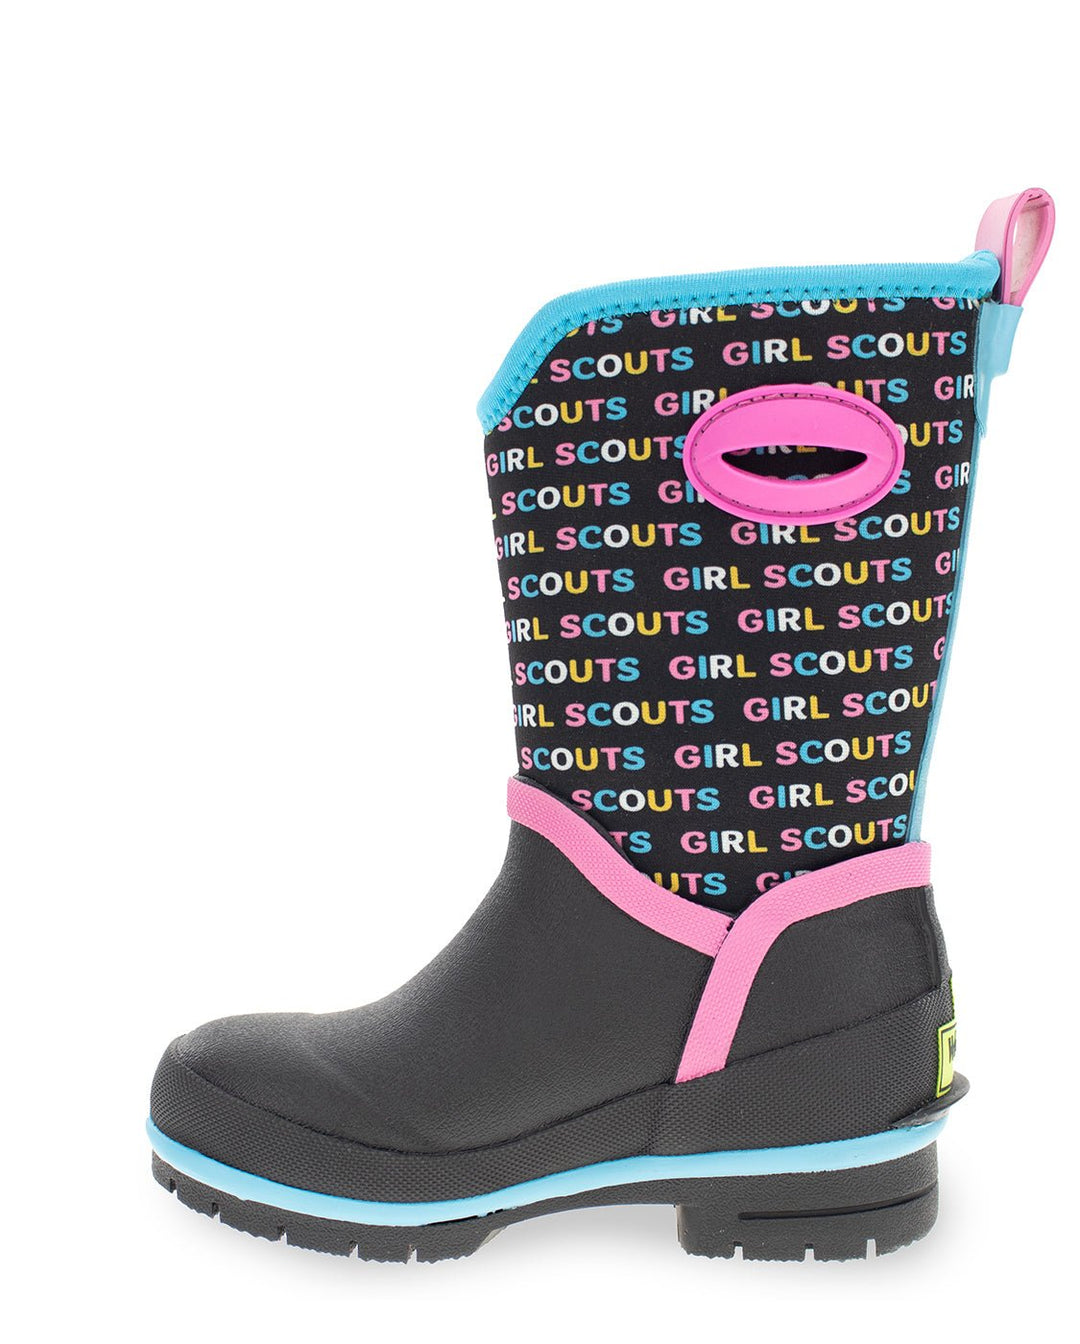 Kids Girl Scouts Neon Neoprene Cold Weather Boot - Black - Western Chief